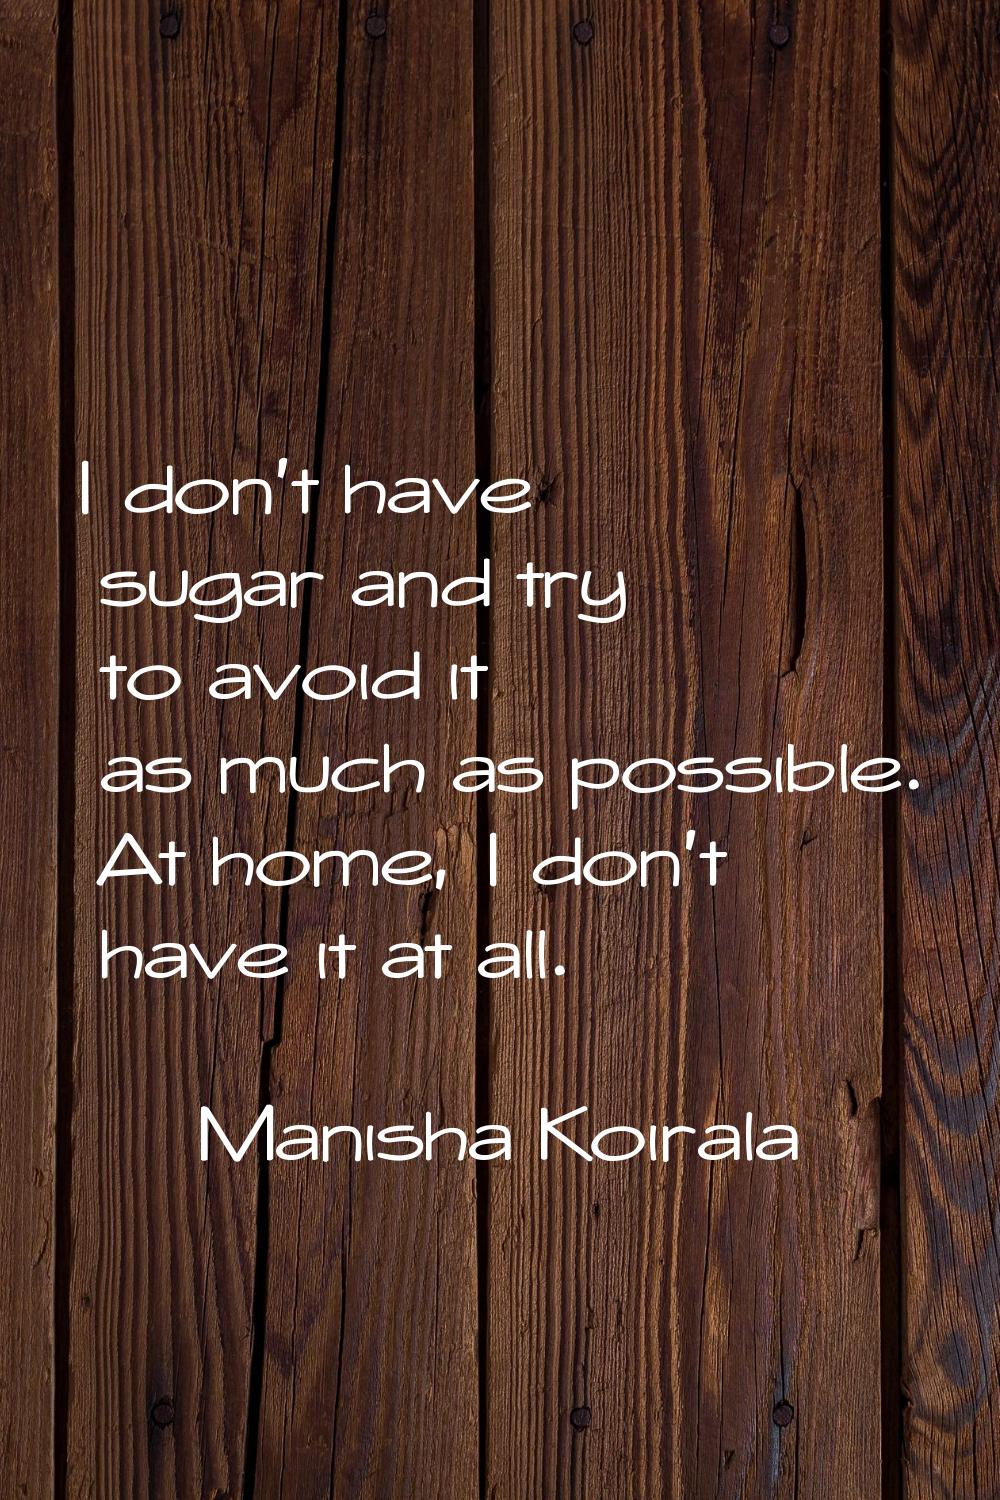 I don't have sugar and try to avoid it as much as possible. At home, I don't have it at all.